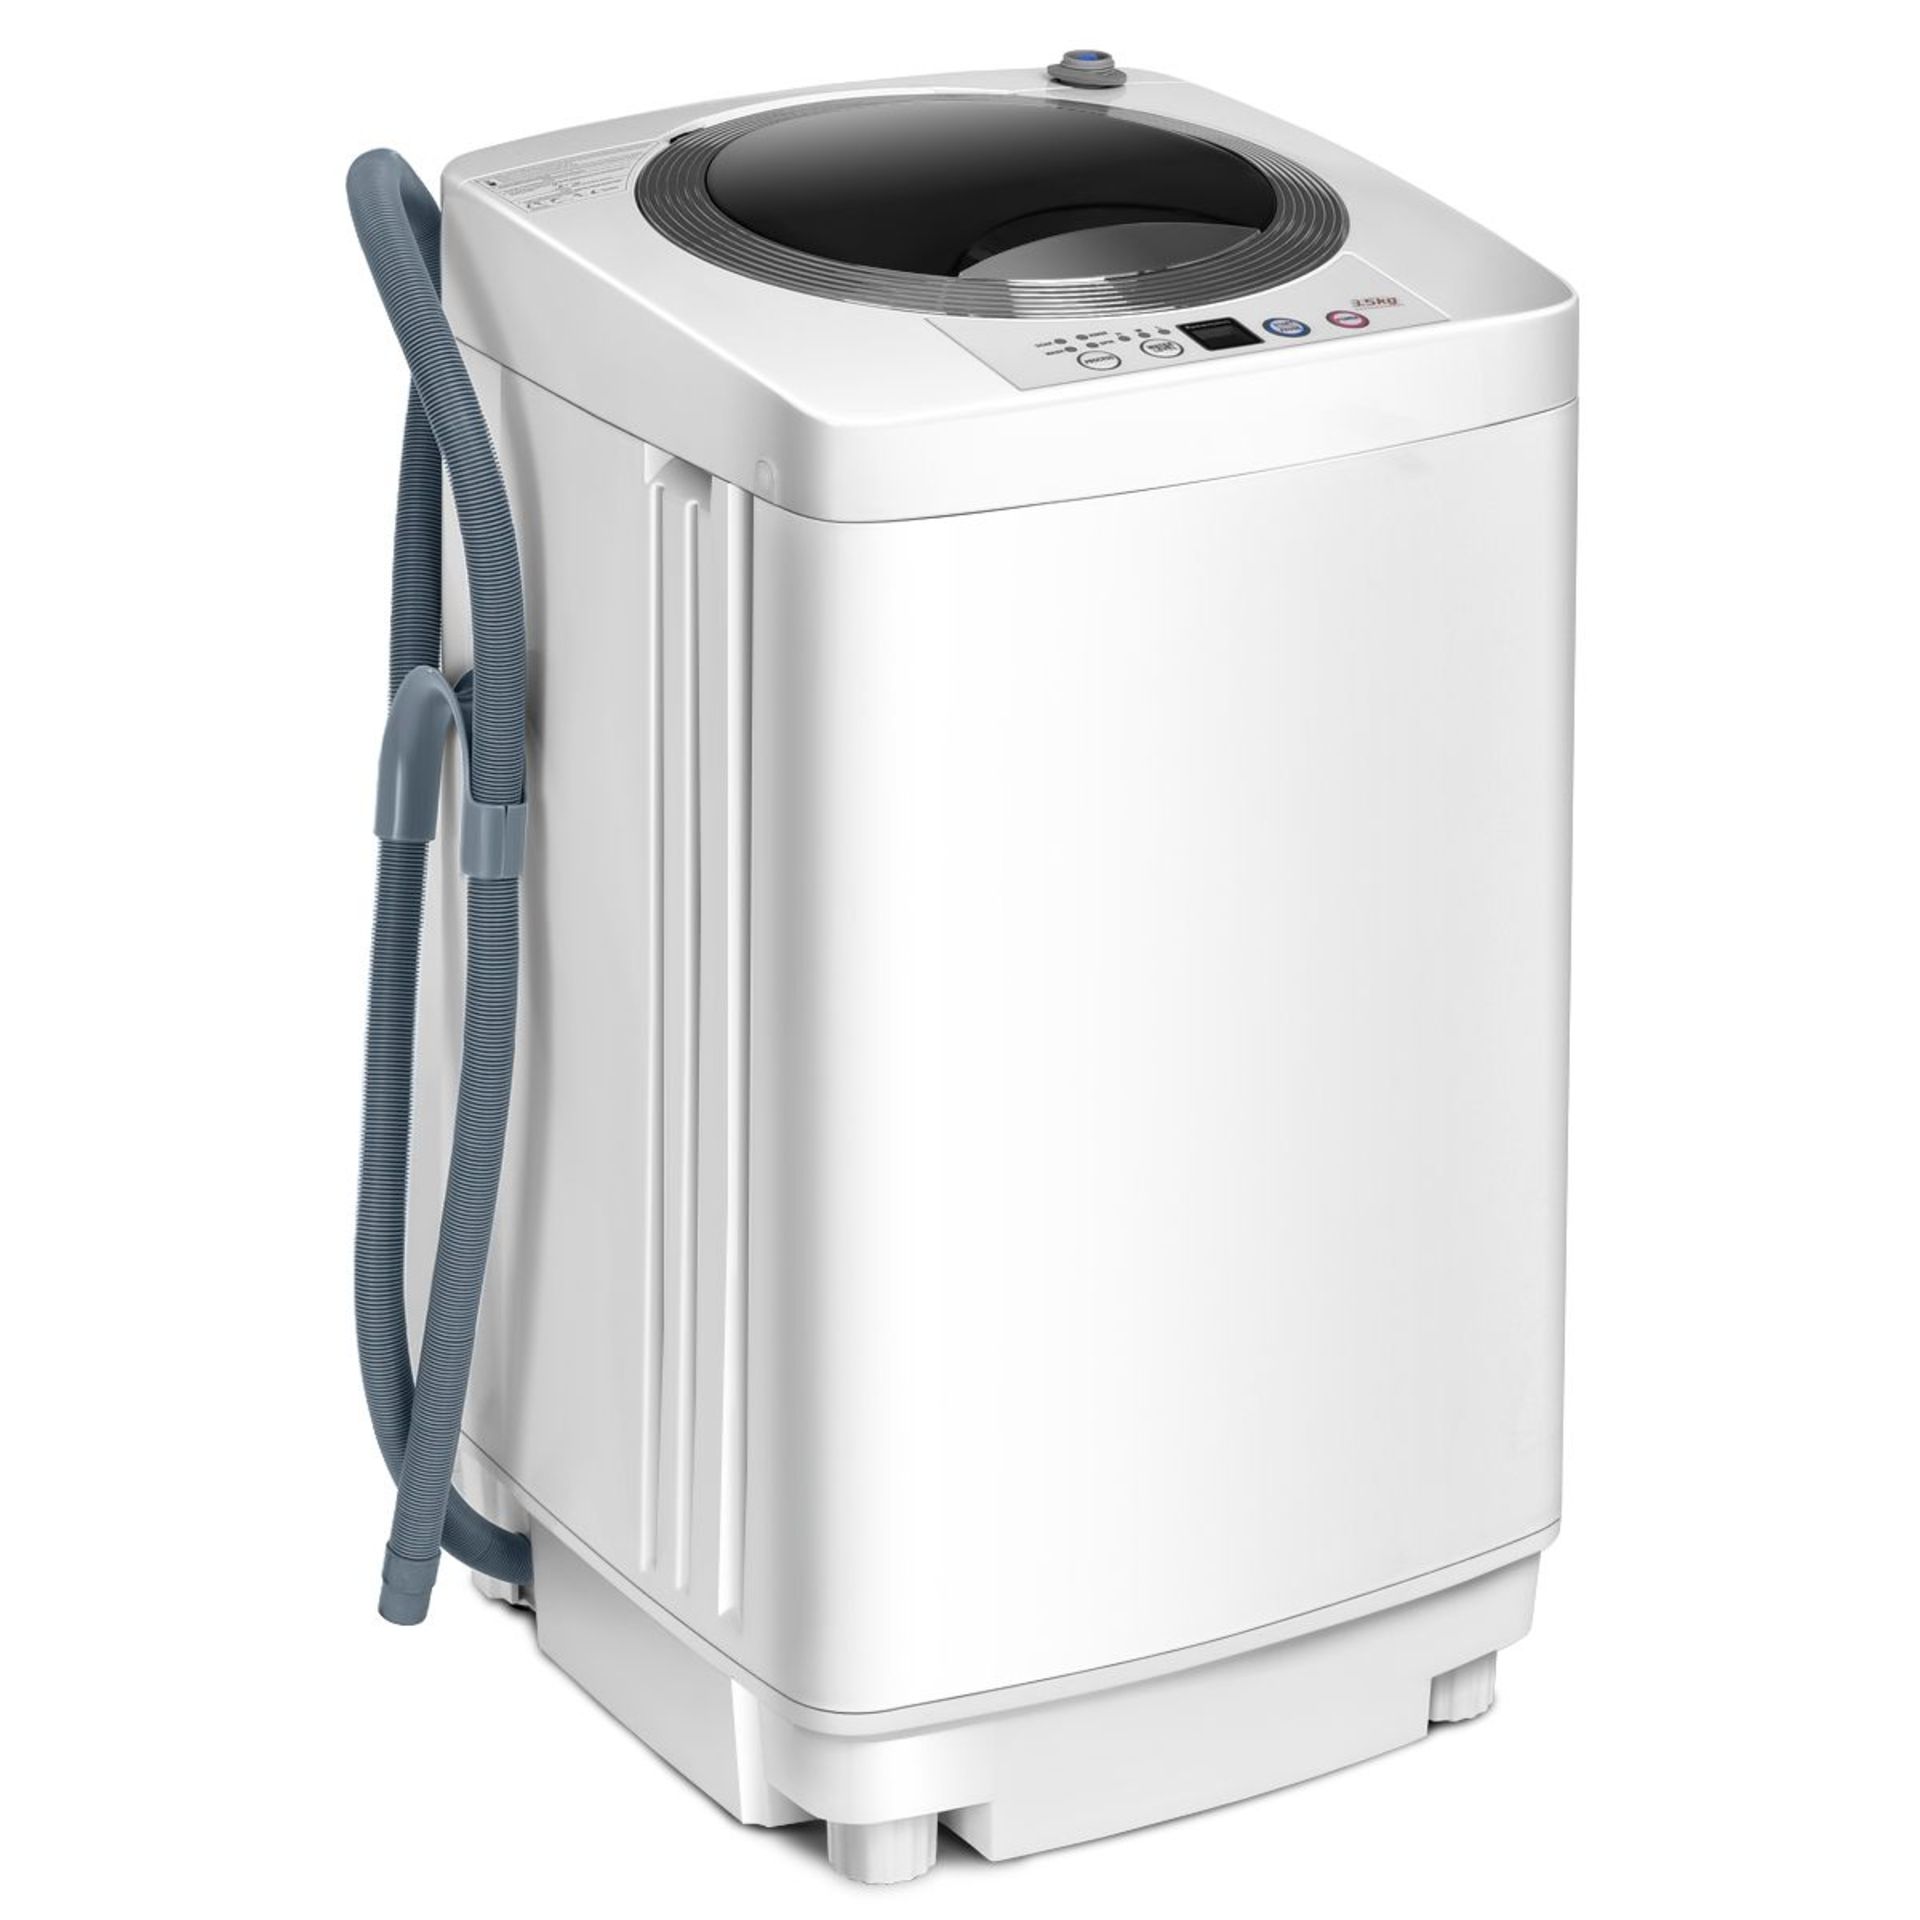 Full-Automatic Portable Washer with 6 Programs and 3 Water Level R13-10